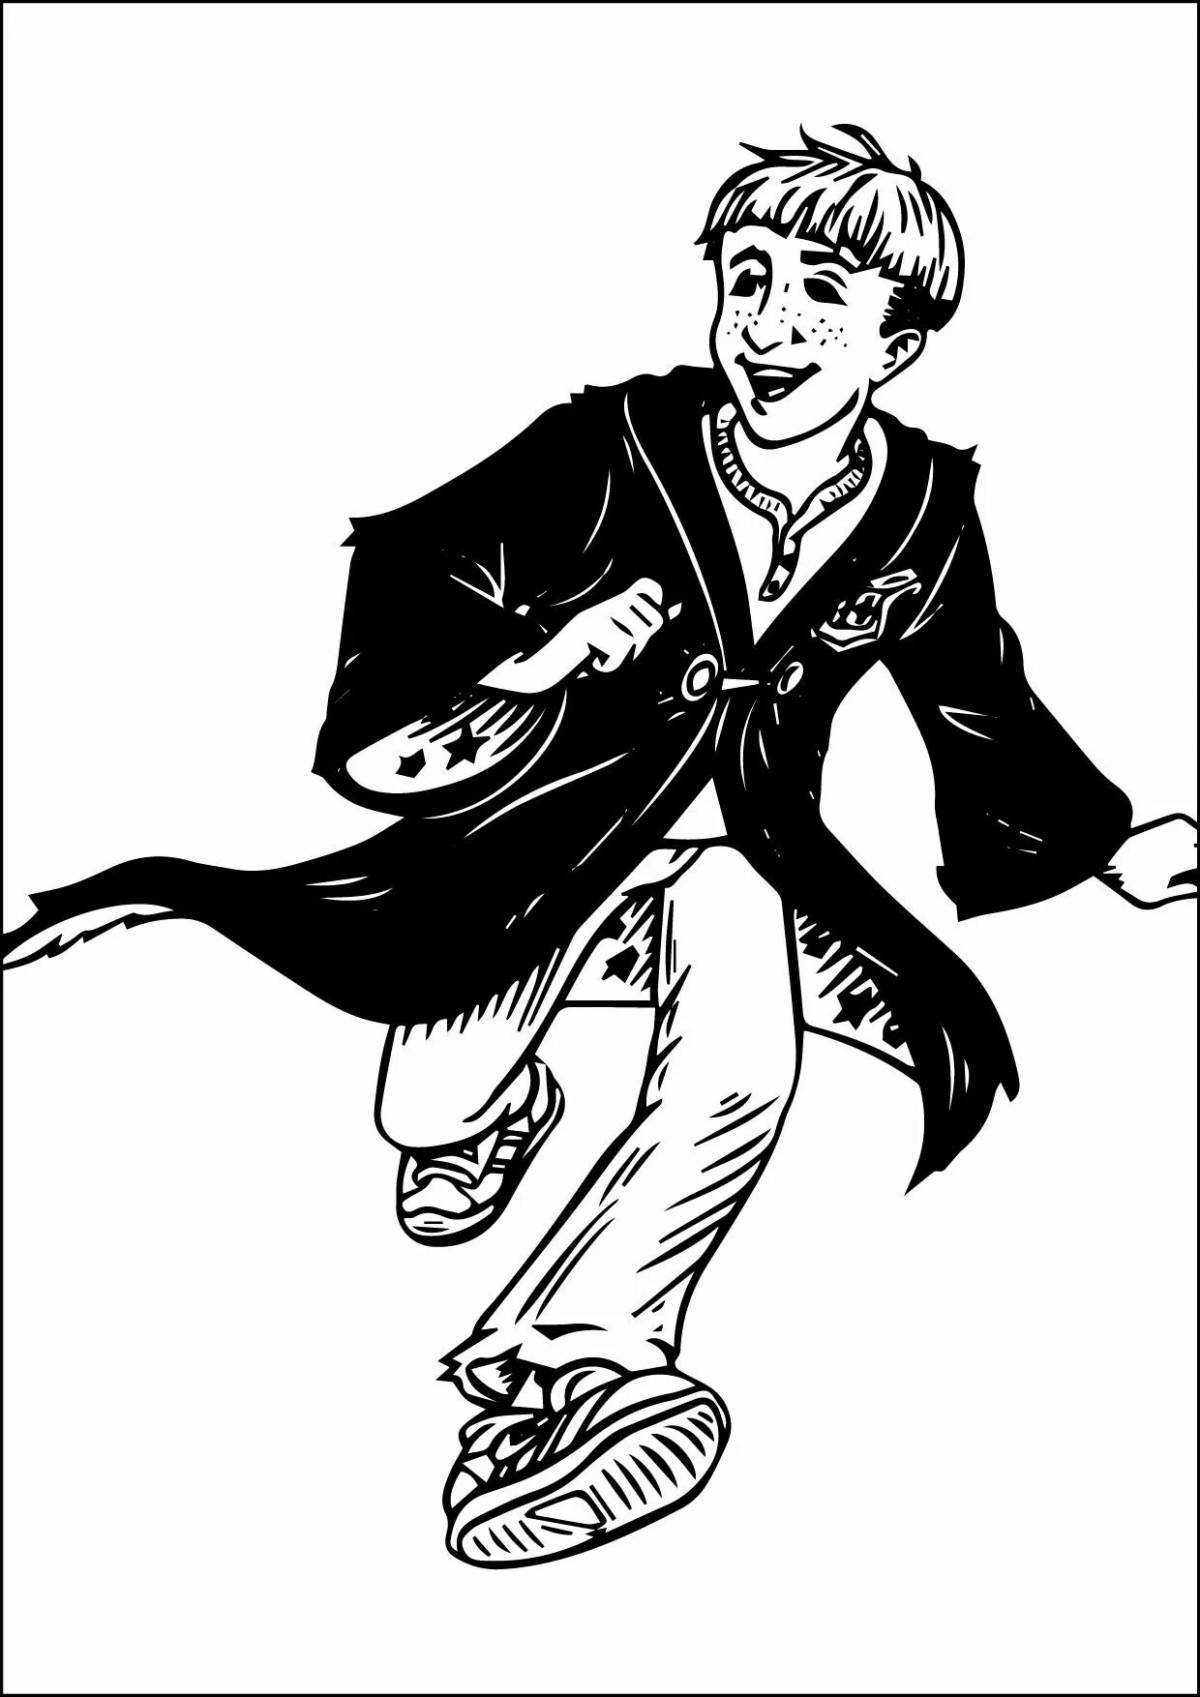 Draco Malfoy mystical harry potter coloring book